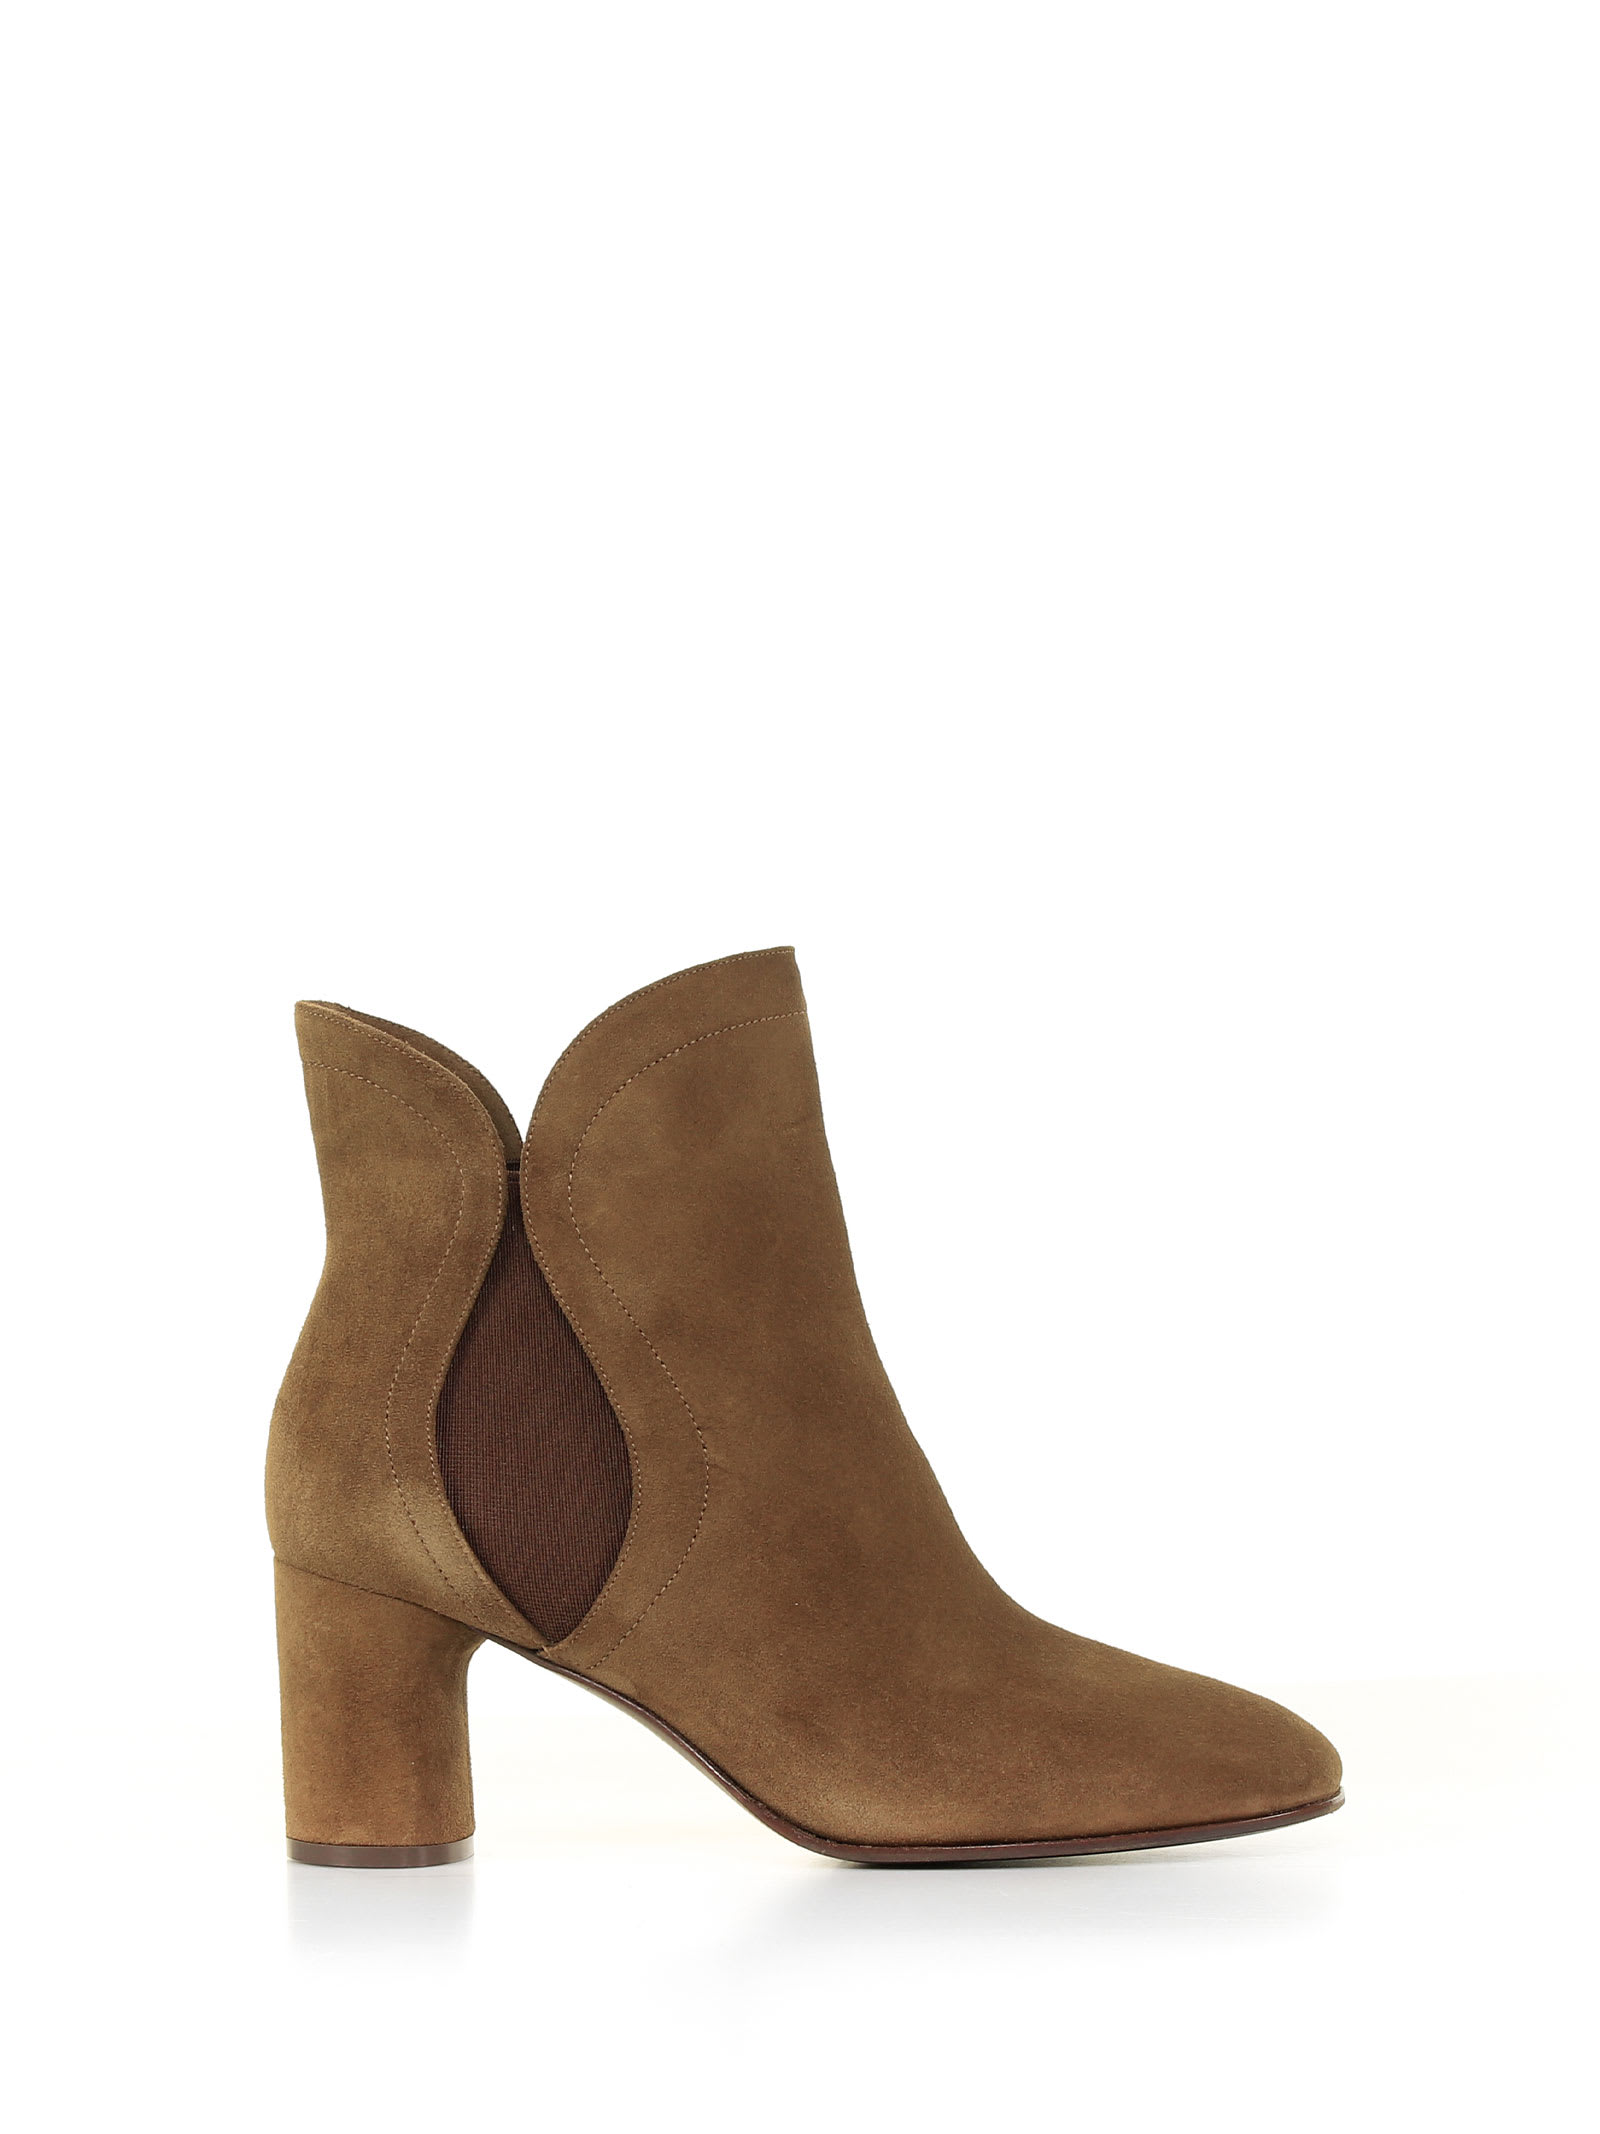 Casadei Suede Ankle Boot